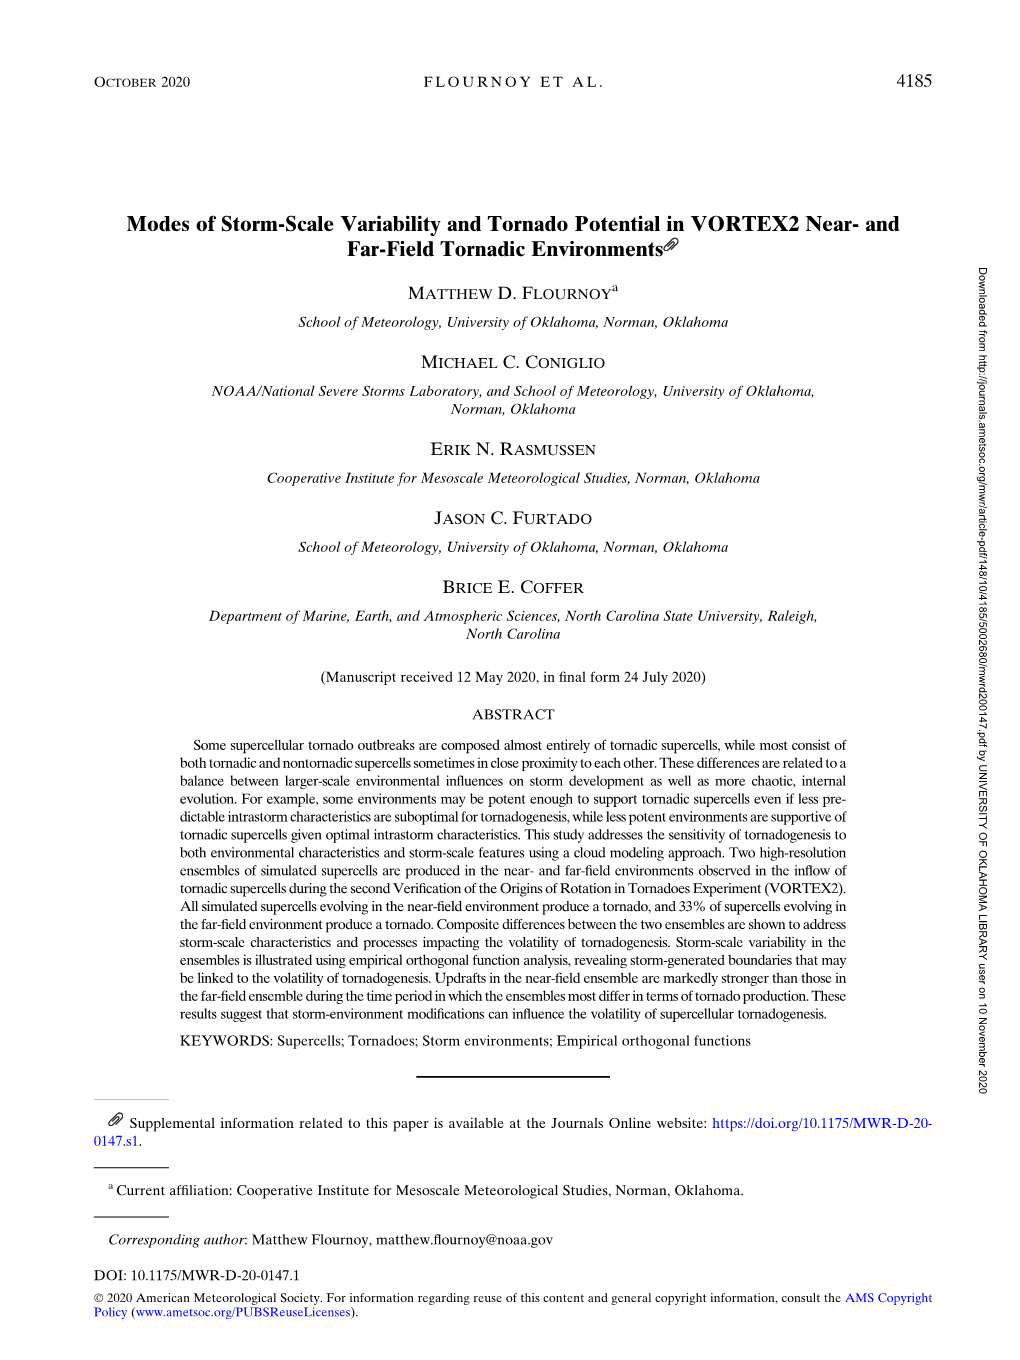 Modes of Storm-Scale Variability and Tornado Potential in VORTEX2 Near